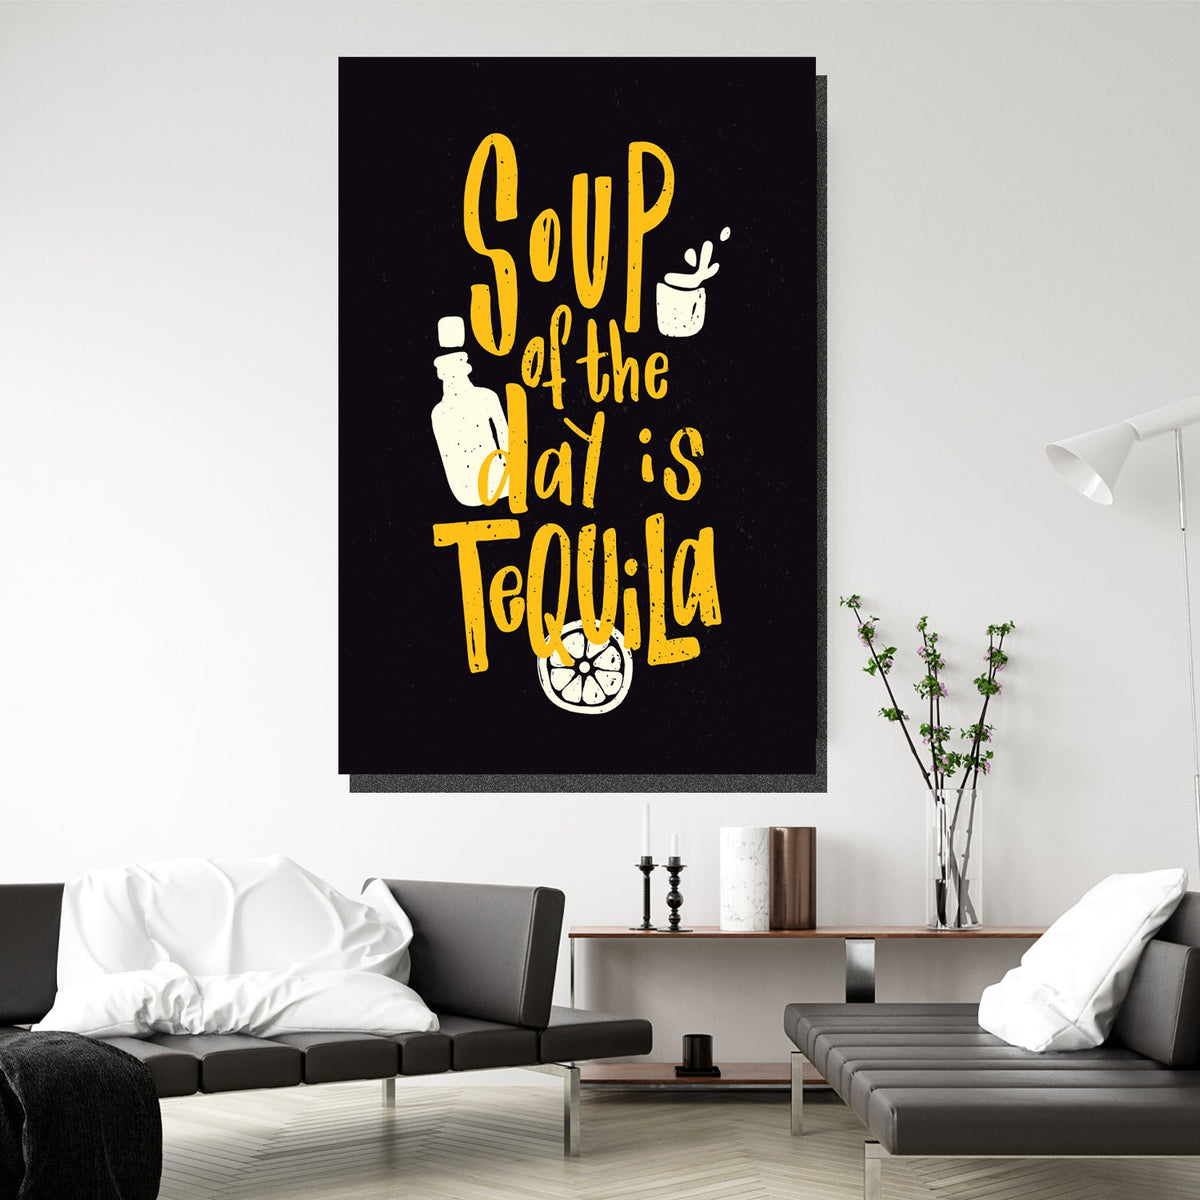 https://cdn.shopify.com/s/files/1/0387/9986/8044/products/SoupoftheDayCanvasArtprintStretched-3.jpg